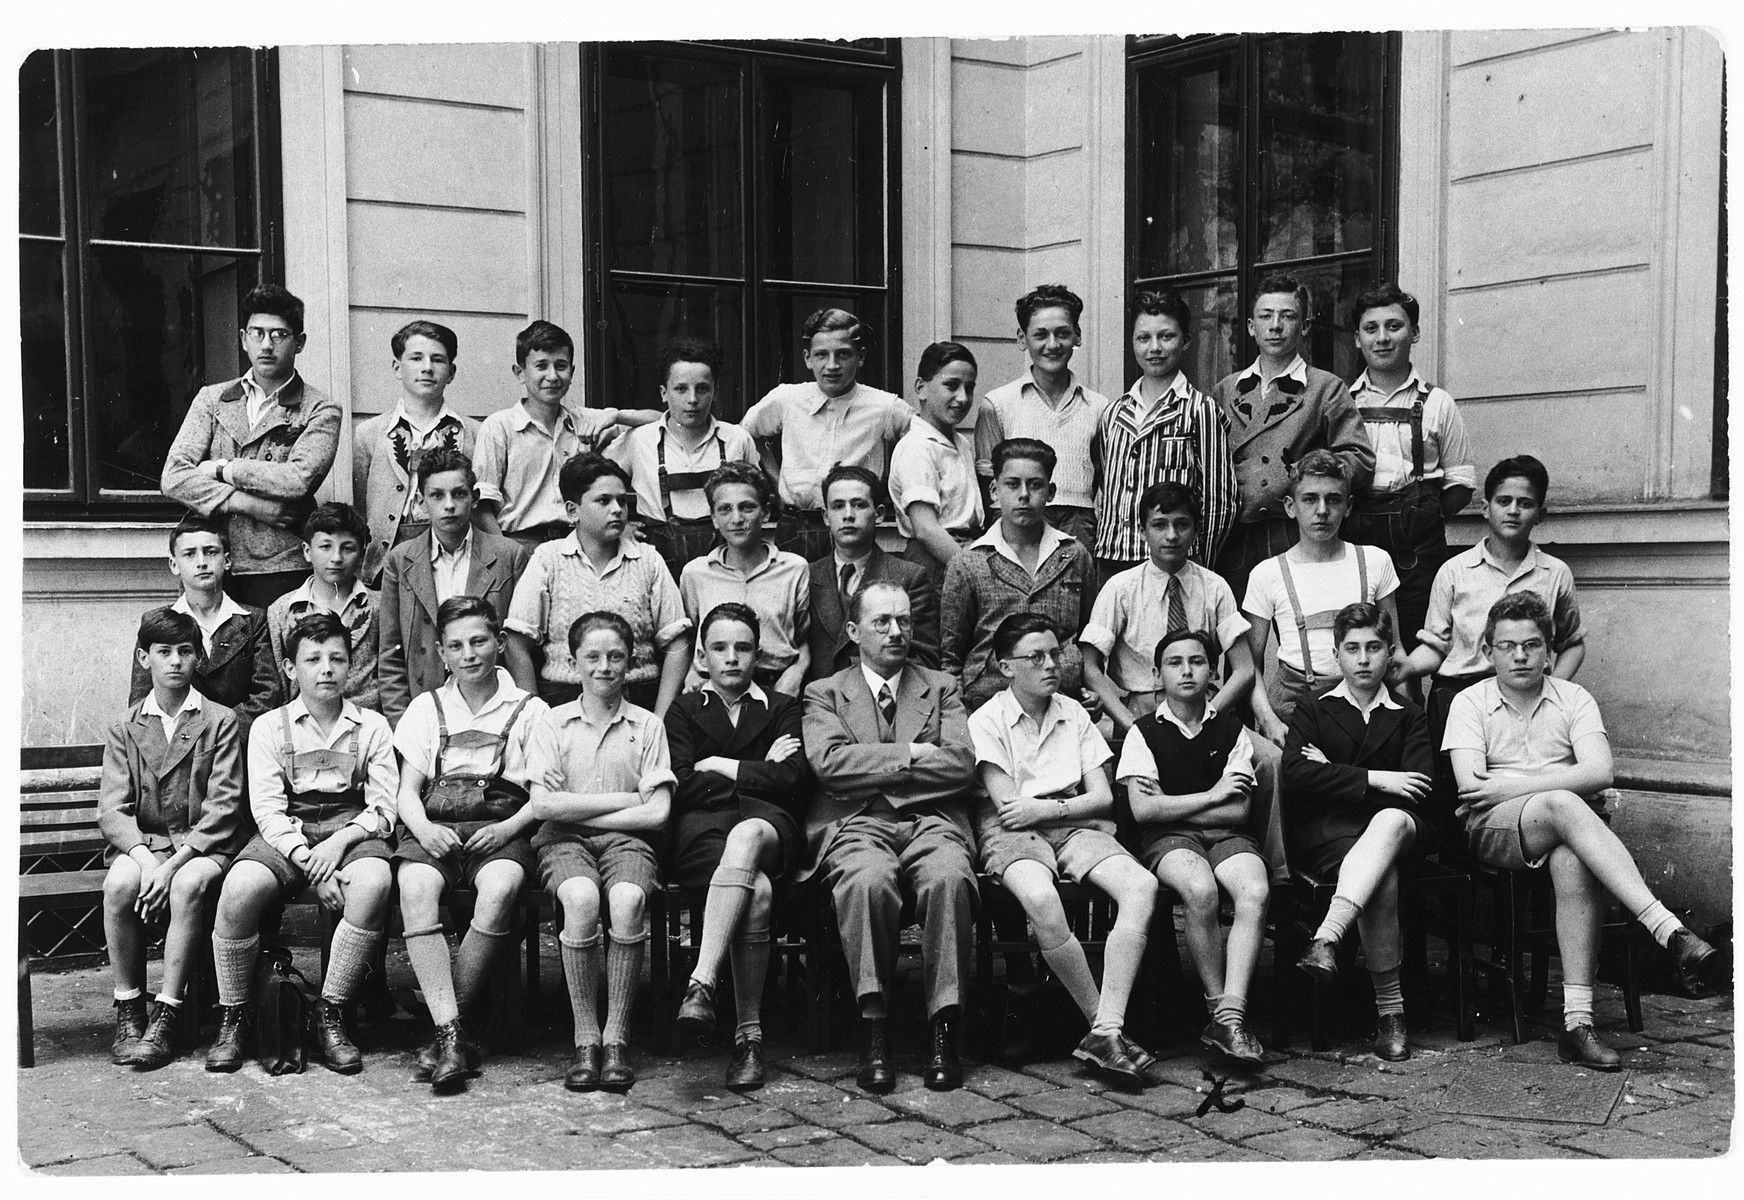 Portrait of a high school class in Vienna composed almost exclusively of Jewish children.

Heinrich Wellisch is seated in the front row, third from the right.